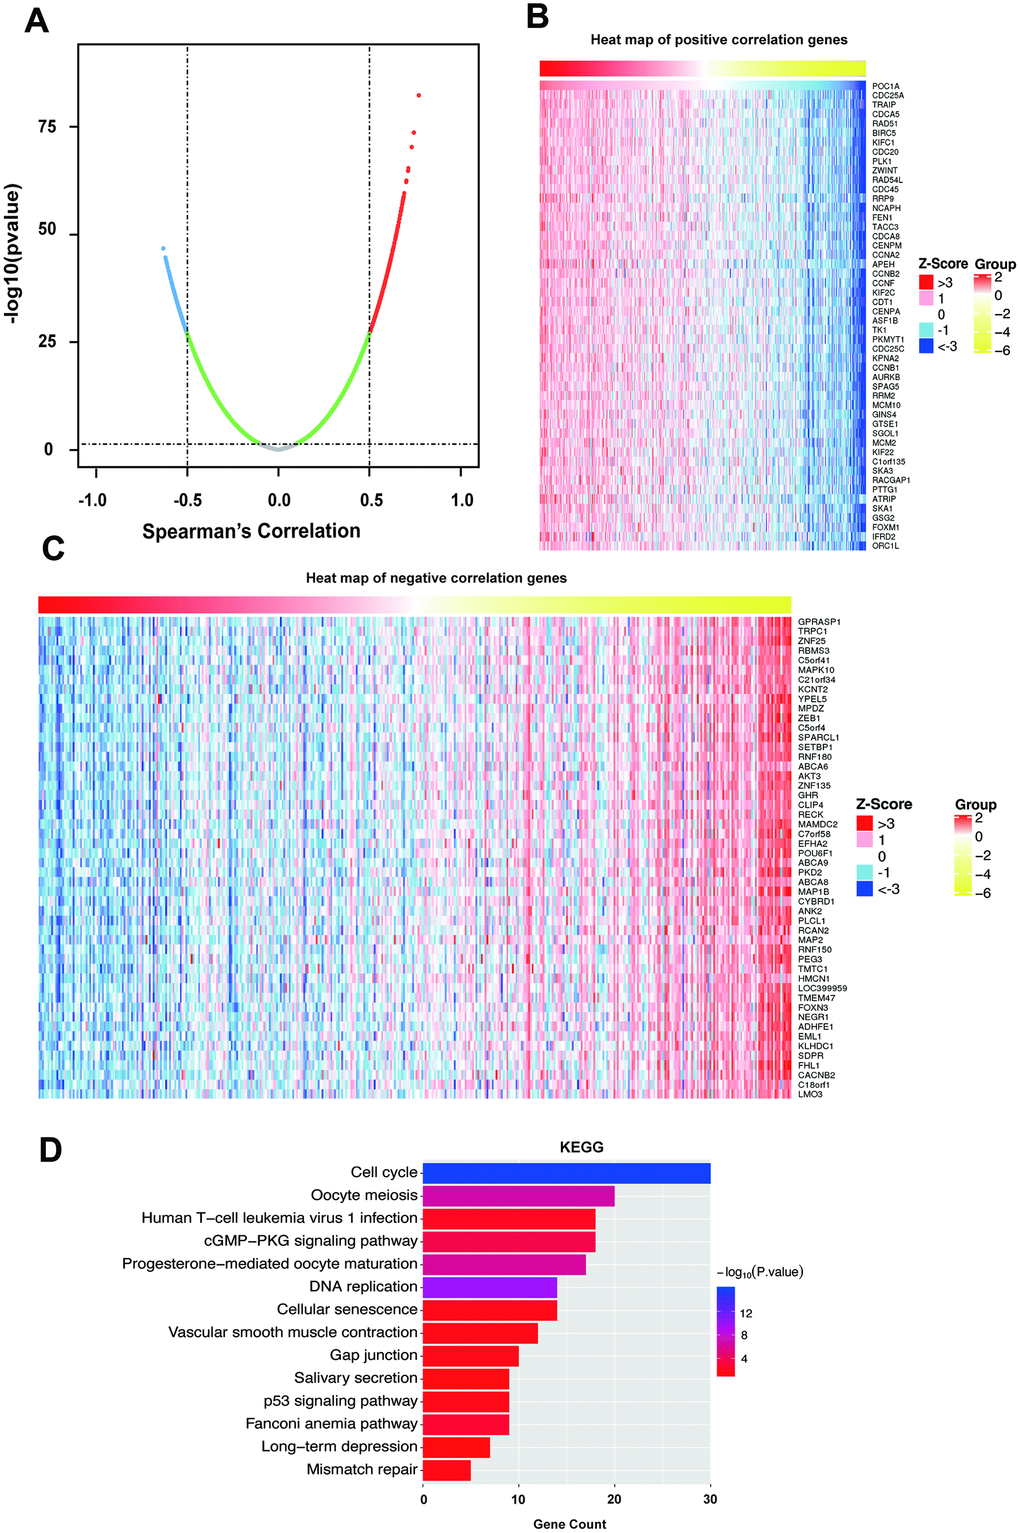 Coexpressed genes of POC1A. (A) Strongly coexpressed genes of POC1A identified by Spearman’s test in GC. (B–C) Heat maps exhibited the top 50 genes that have positive and negative correlations with POC1A in GC. Red represents genes with strong positive correlation, and blue indicates genes with strong negative correlation. (D) KEGG pathway enrichment of genes coexpressed with POC1A.